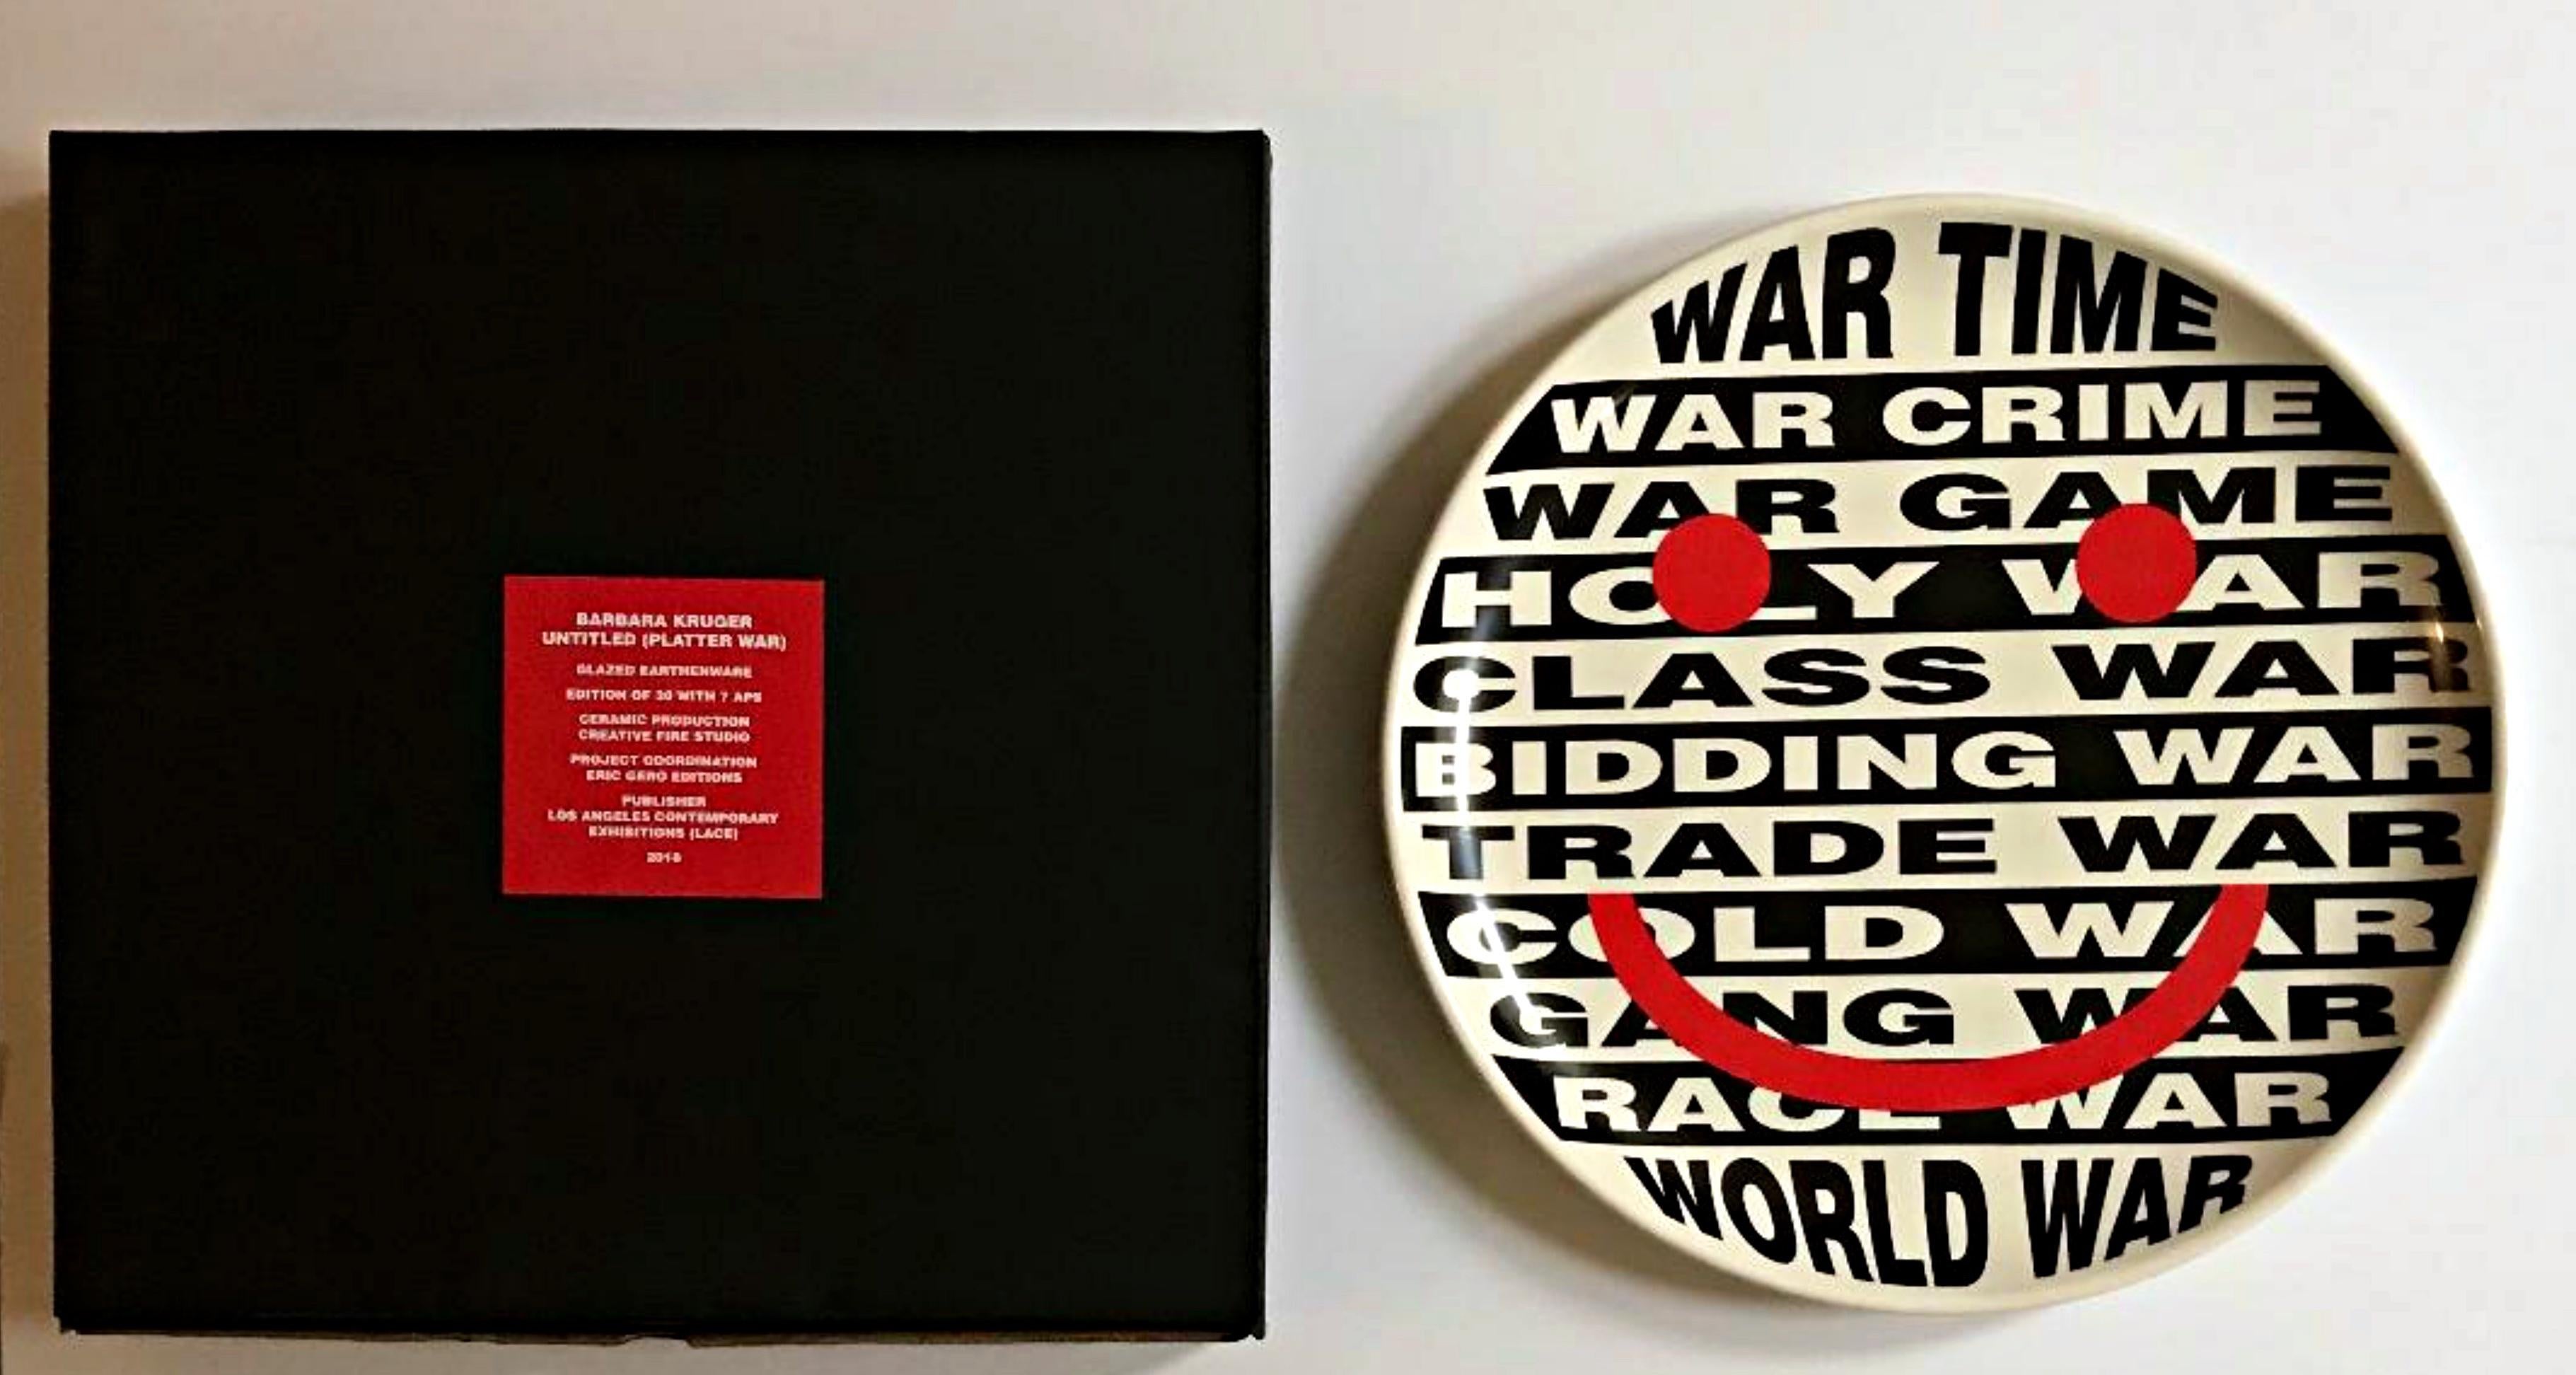 Barbara Kruger
War Platter, 2018
Glazed Earthenware
Artists name fired on the underside which is considered her authorized signature as she officially does not sign her works
Hand numbered 12/30 on the underside
15 × 15 inches